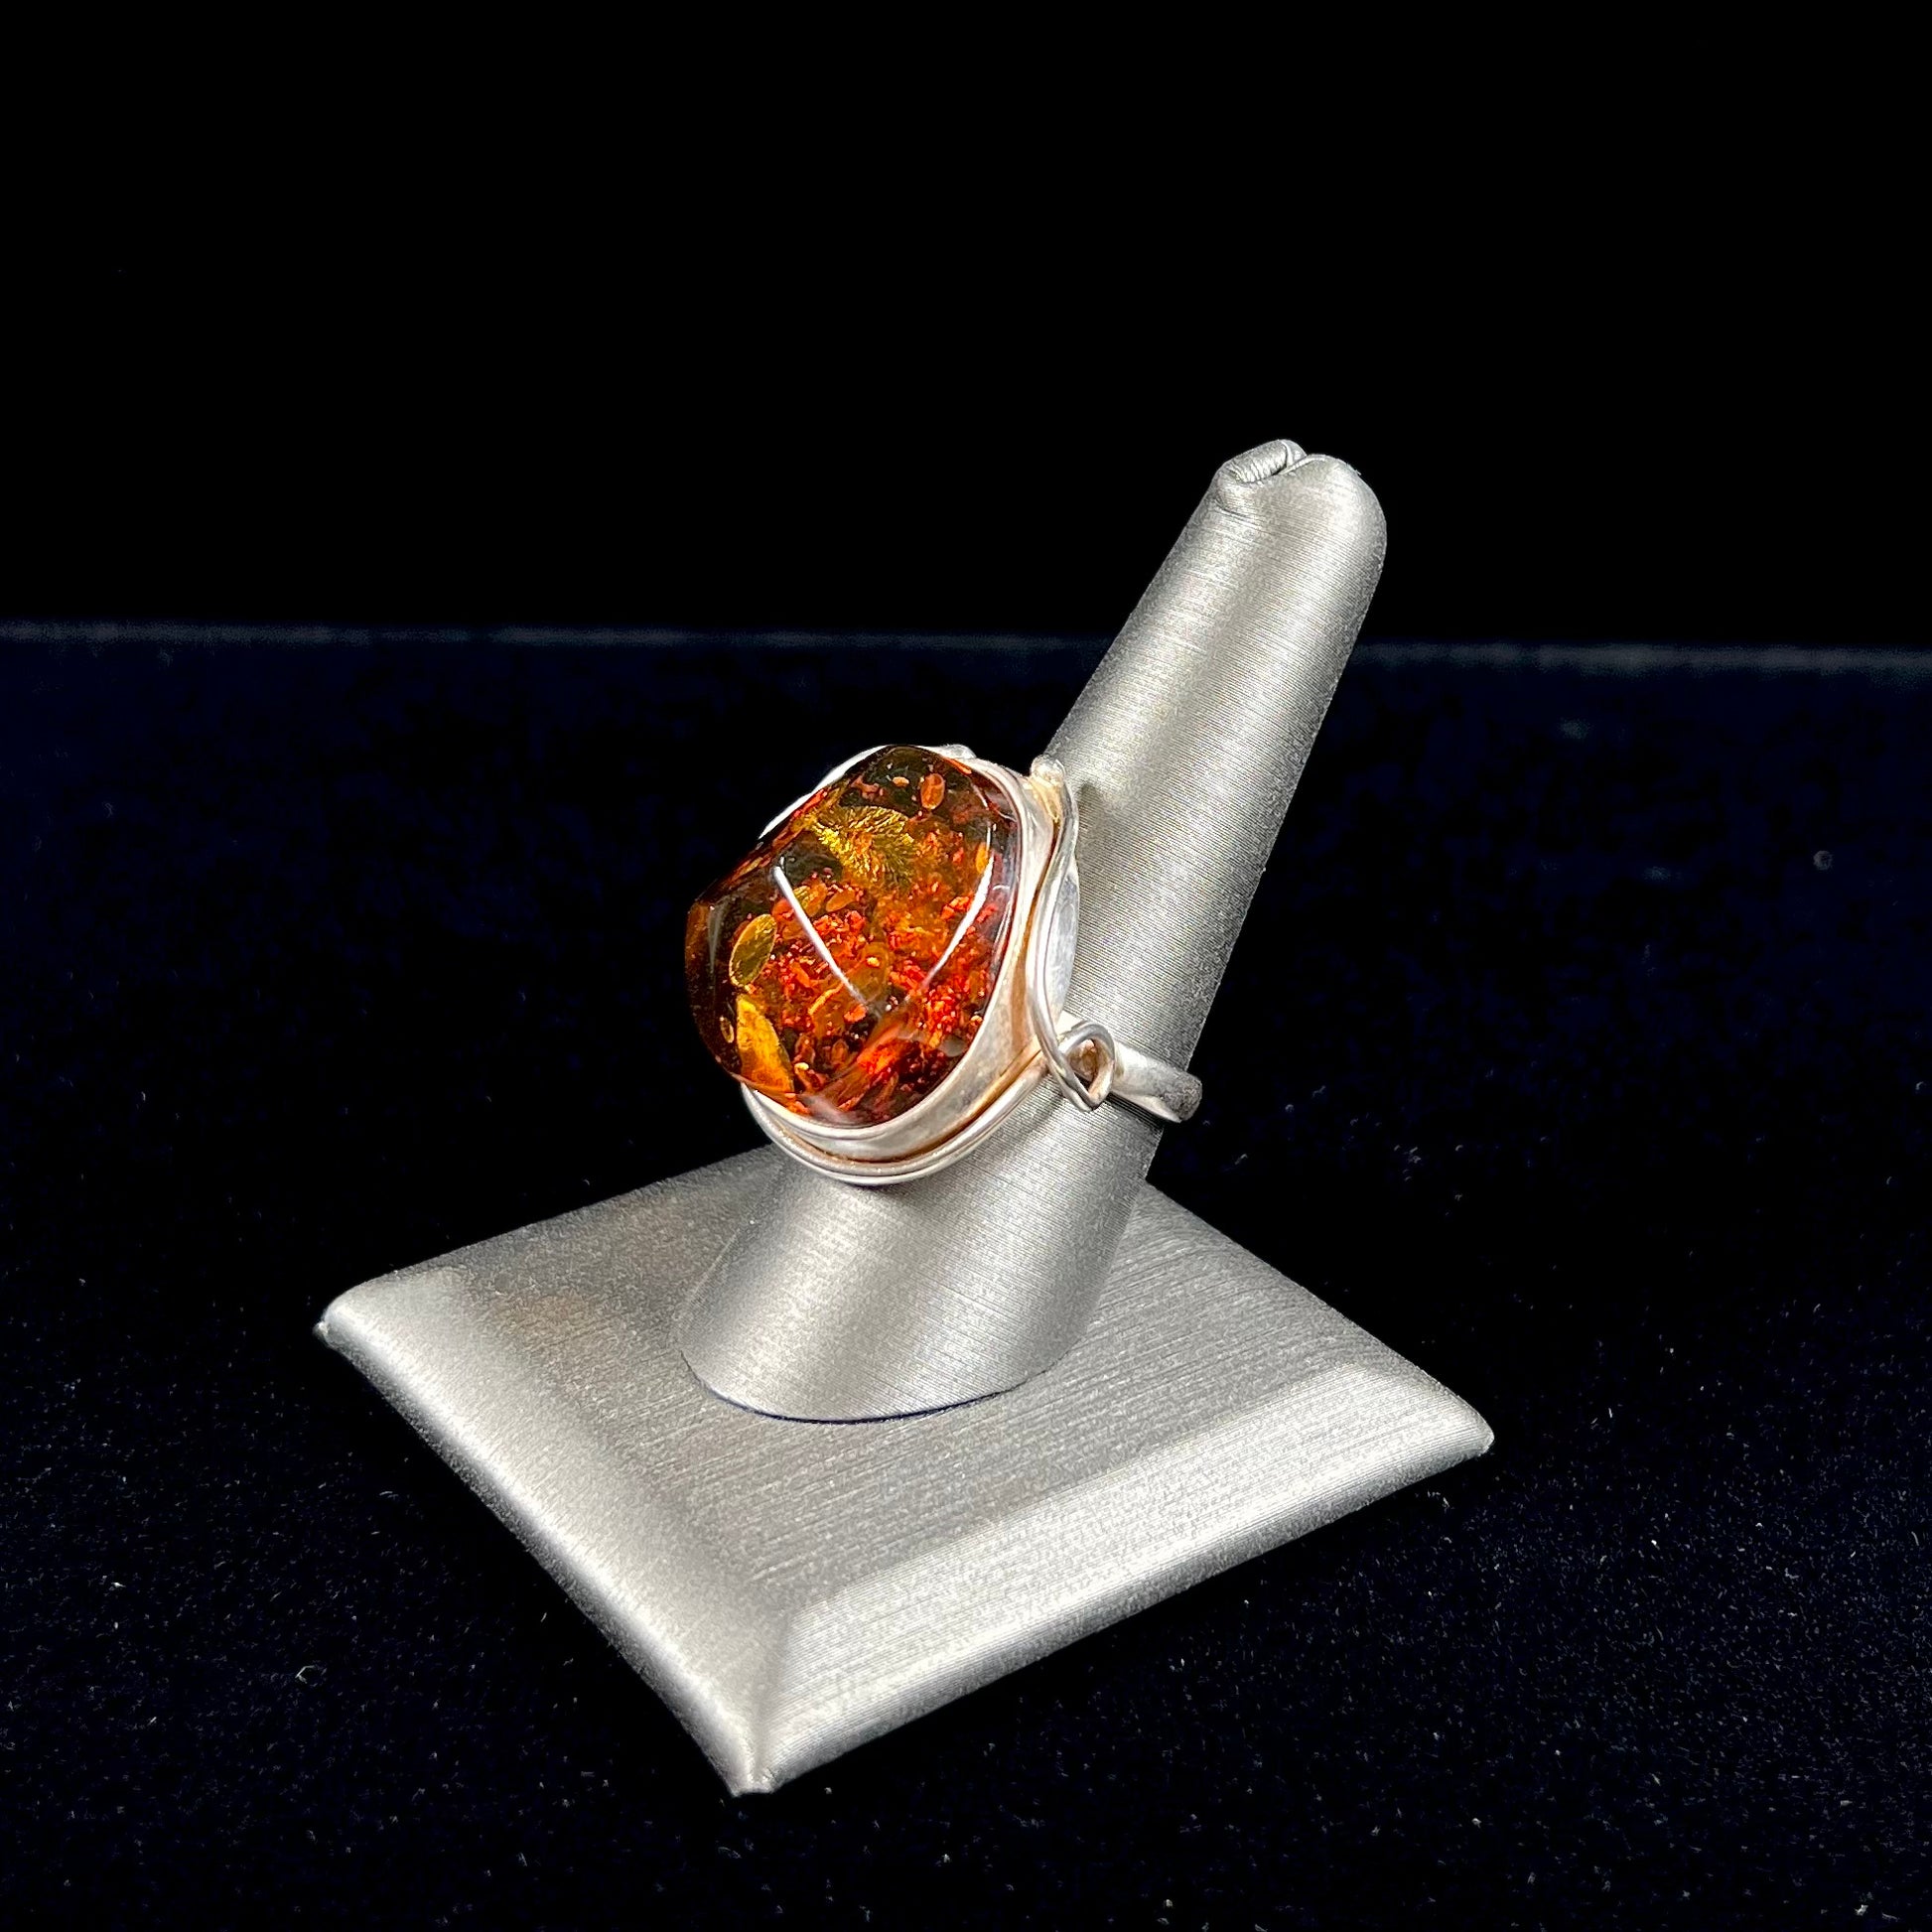 Unisex sterling silver ring set with a sun-spangled Baltic amber gemstone.